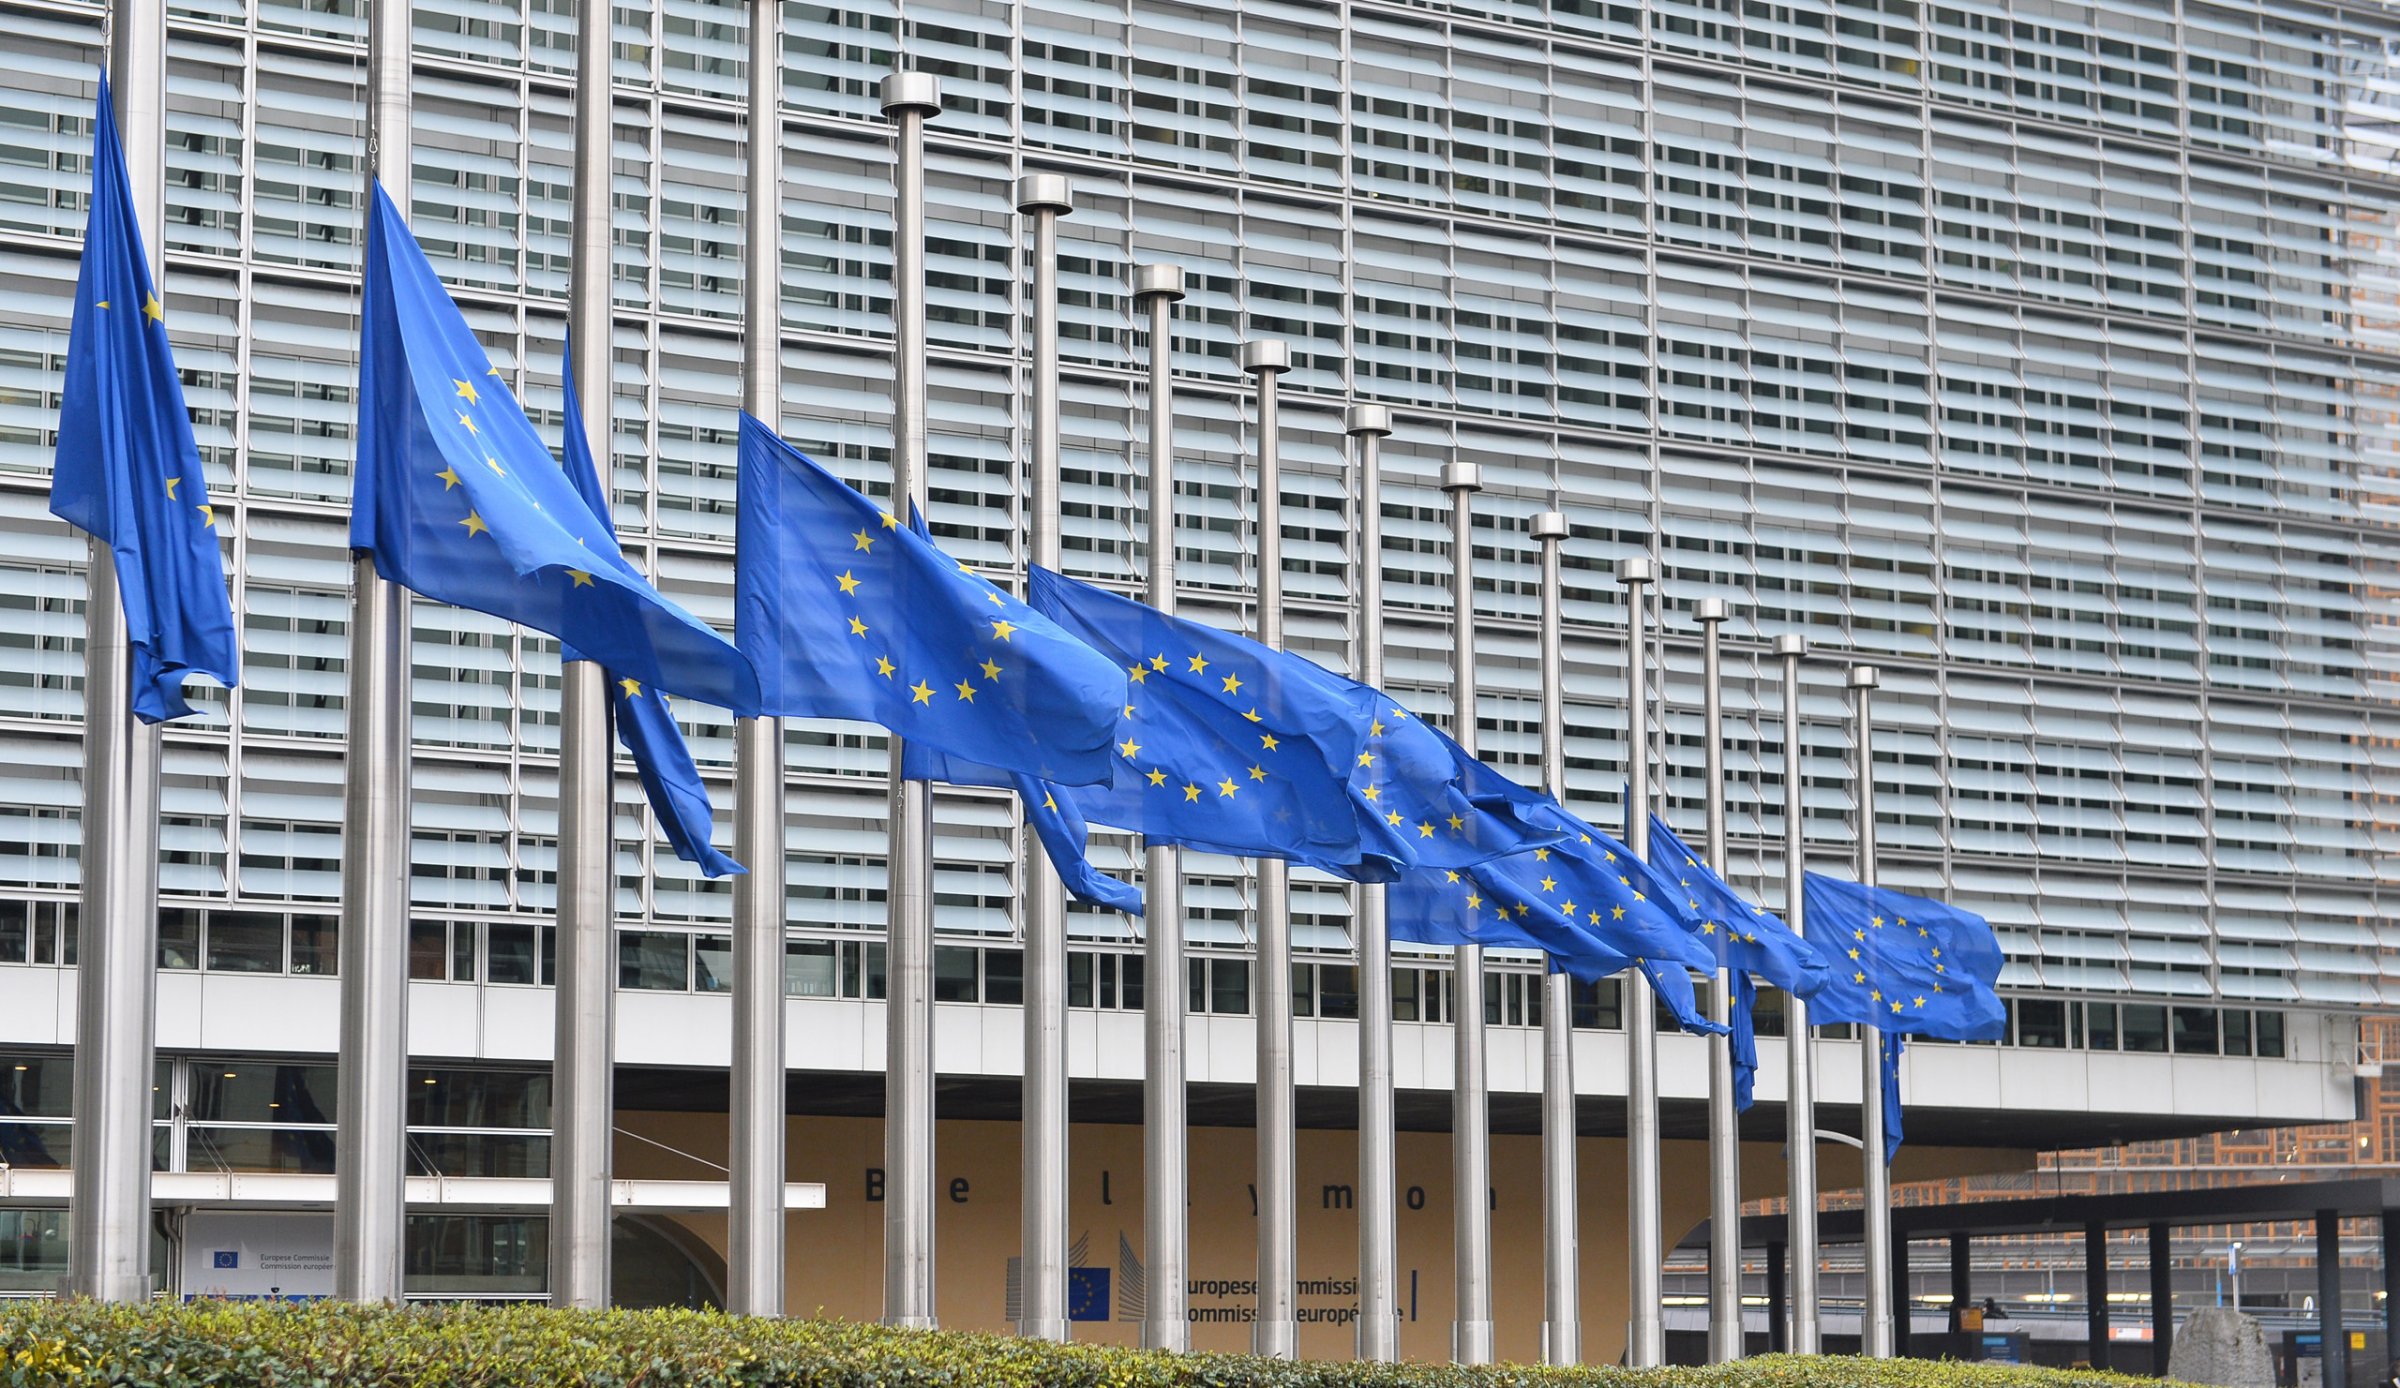 European flags in front of the EU Berlaymont building in the centre of Brussels on March 23, 2016.